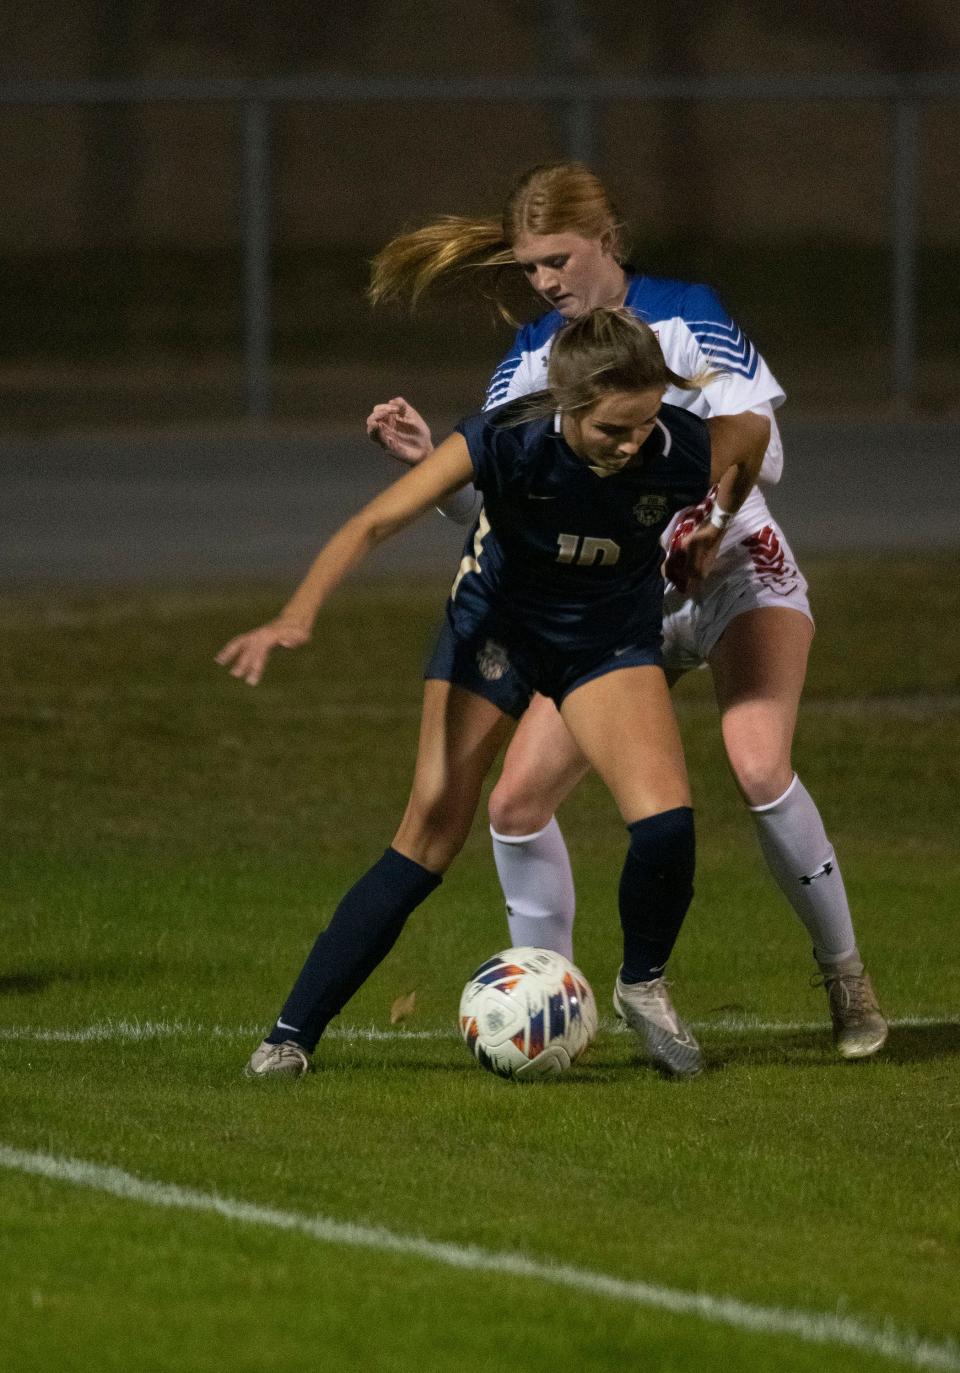 Gulf Breeze forward Skylar Hendricks (No. 10) battles Pace defender Lacie Goodale (No. 3) for possession in the corner during a District 1-6A match Wednesday night.